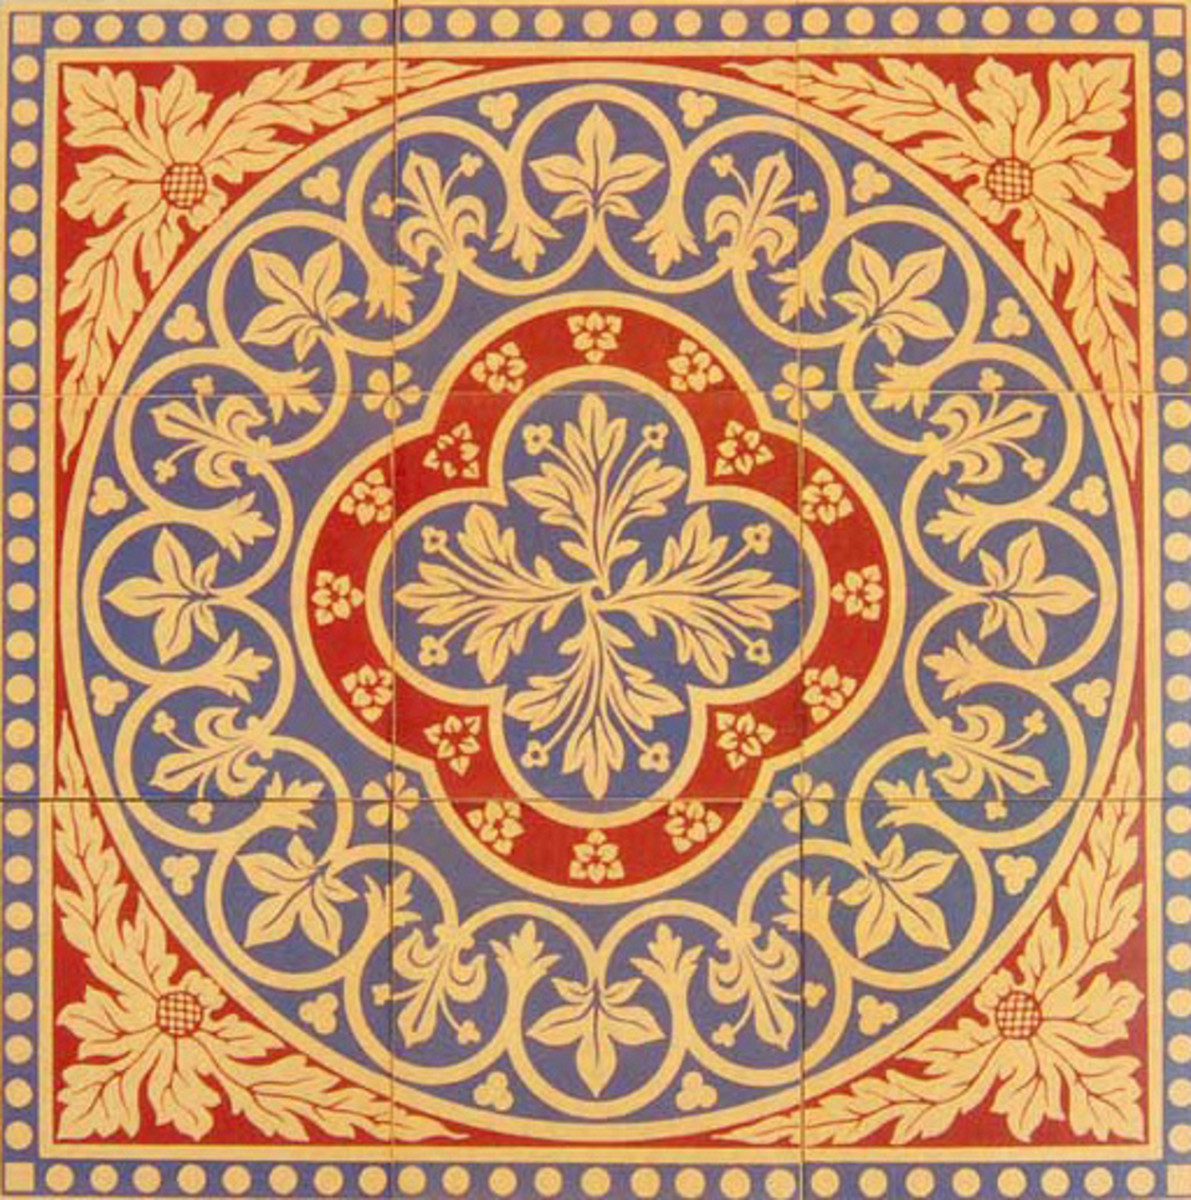 A more affordable, silk-screened faux encaustic tile from Tile Source.